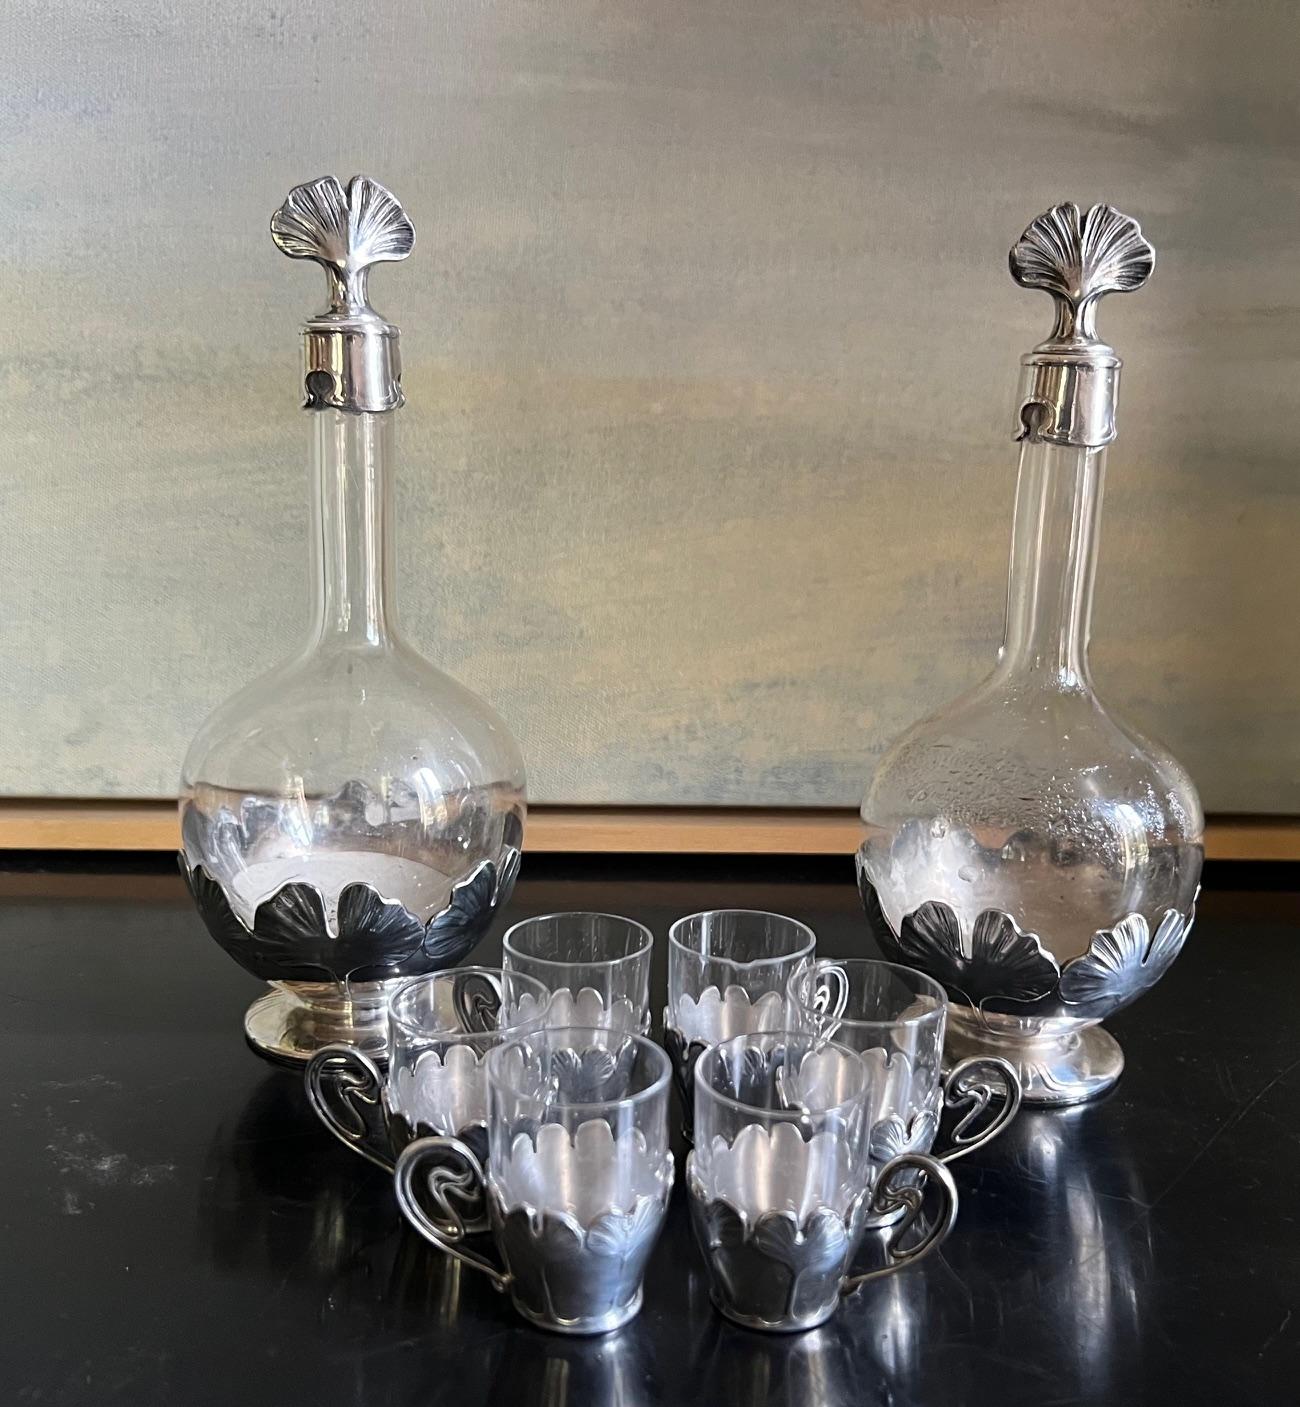 Early 20th Century Christofle Art Nouveau Decanter and Glass Set of 8 In Good Condition For Sale In Ross, CA